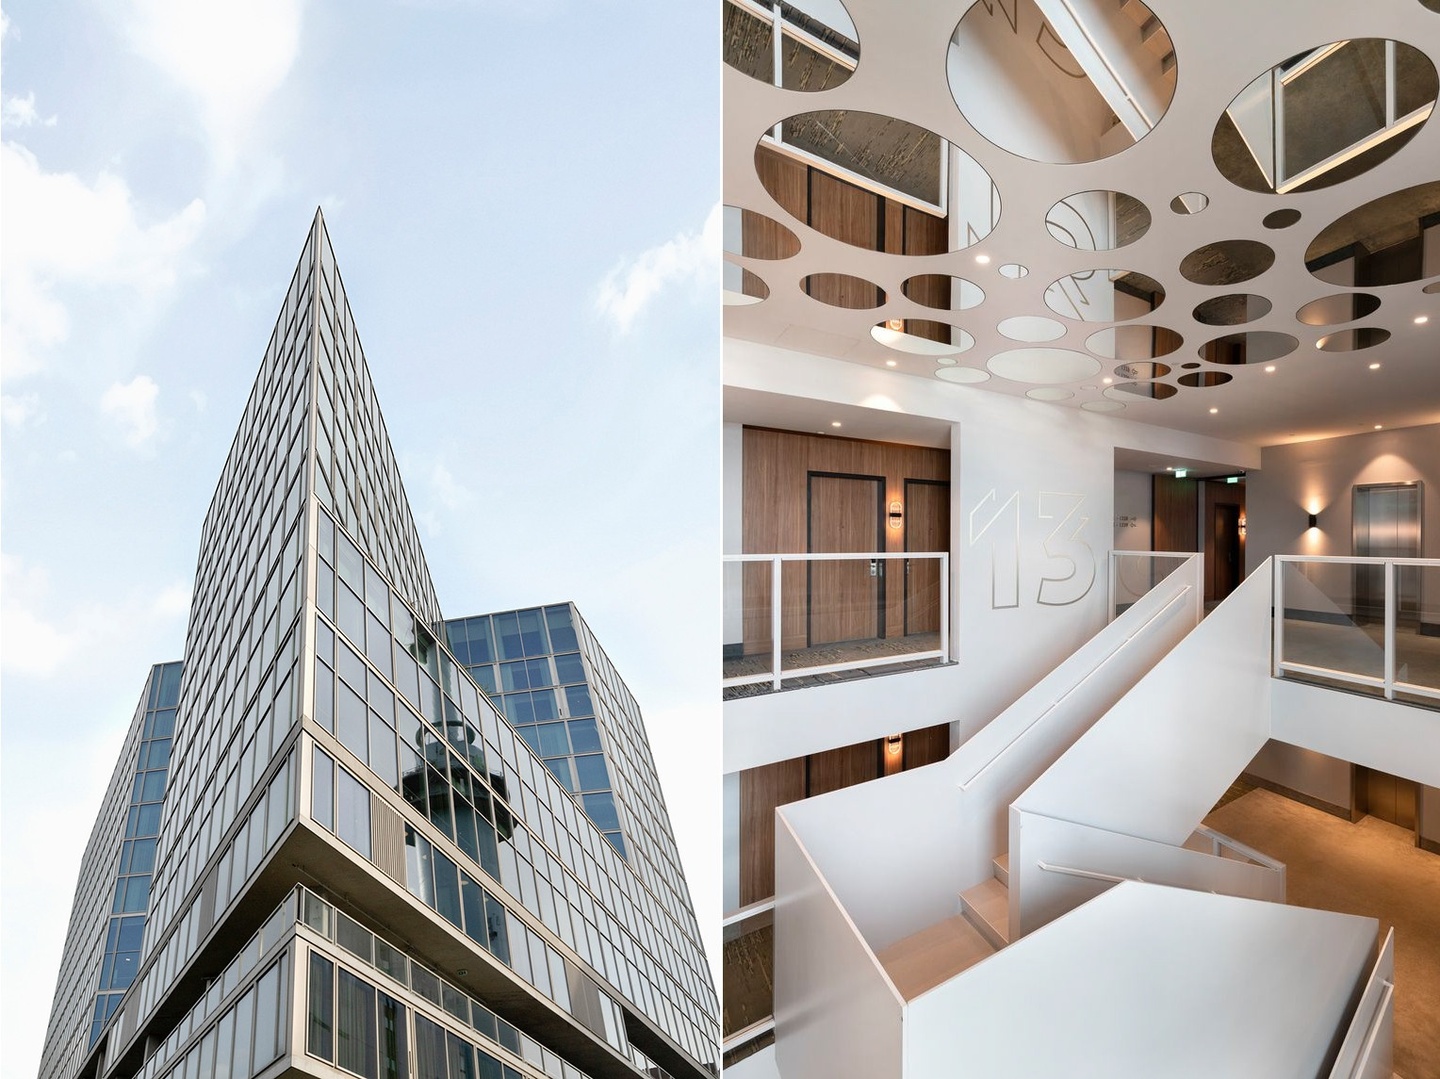 Side-by-side photos of the exterior facade of a multistory hotel, looking skyward and of the interior space of the hotel, featuring a irregularly shaped white staircases and a partially open ceiling with circular openings between floors.